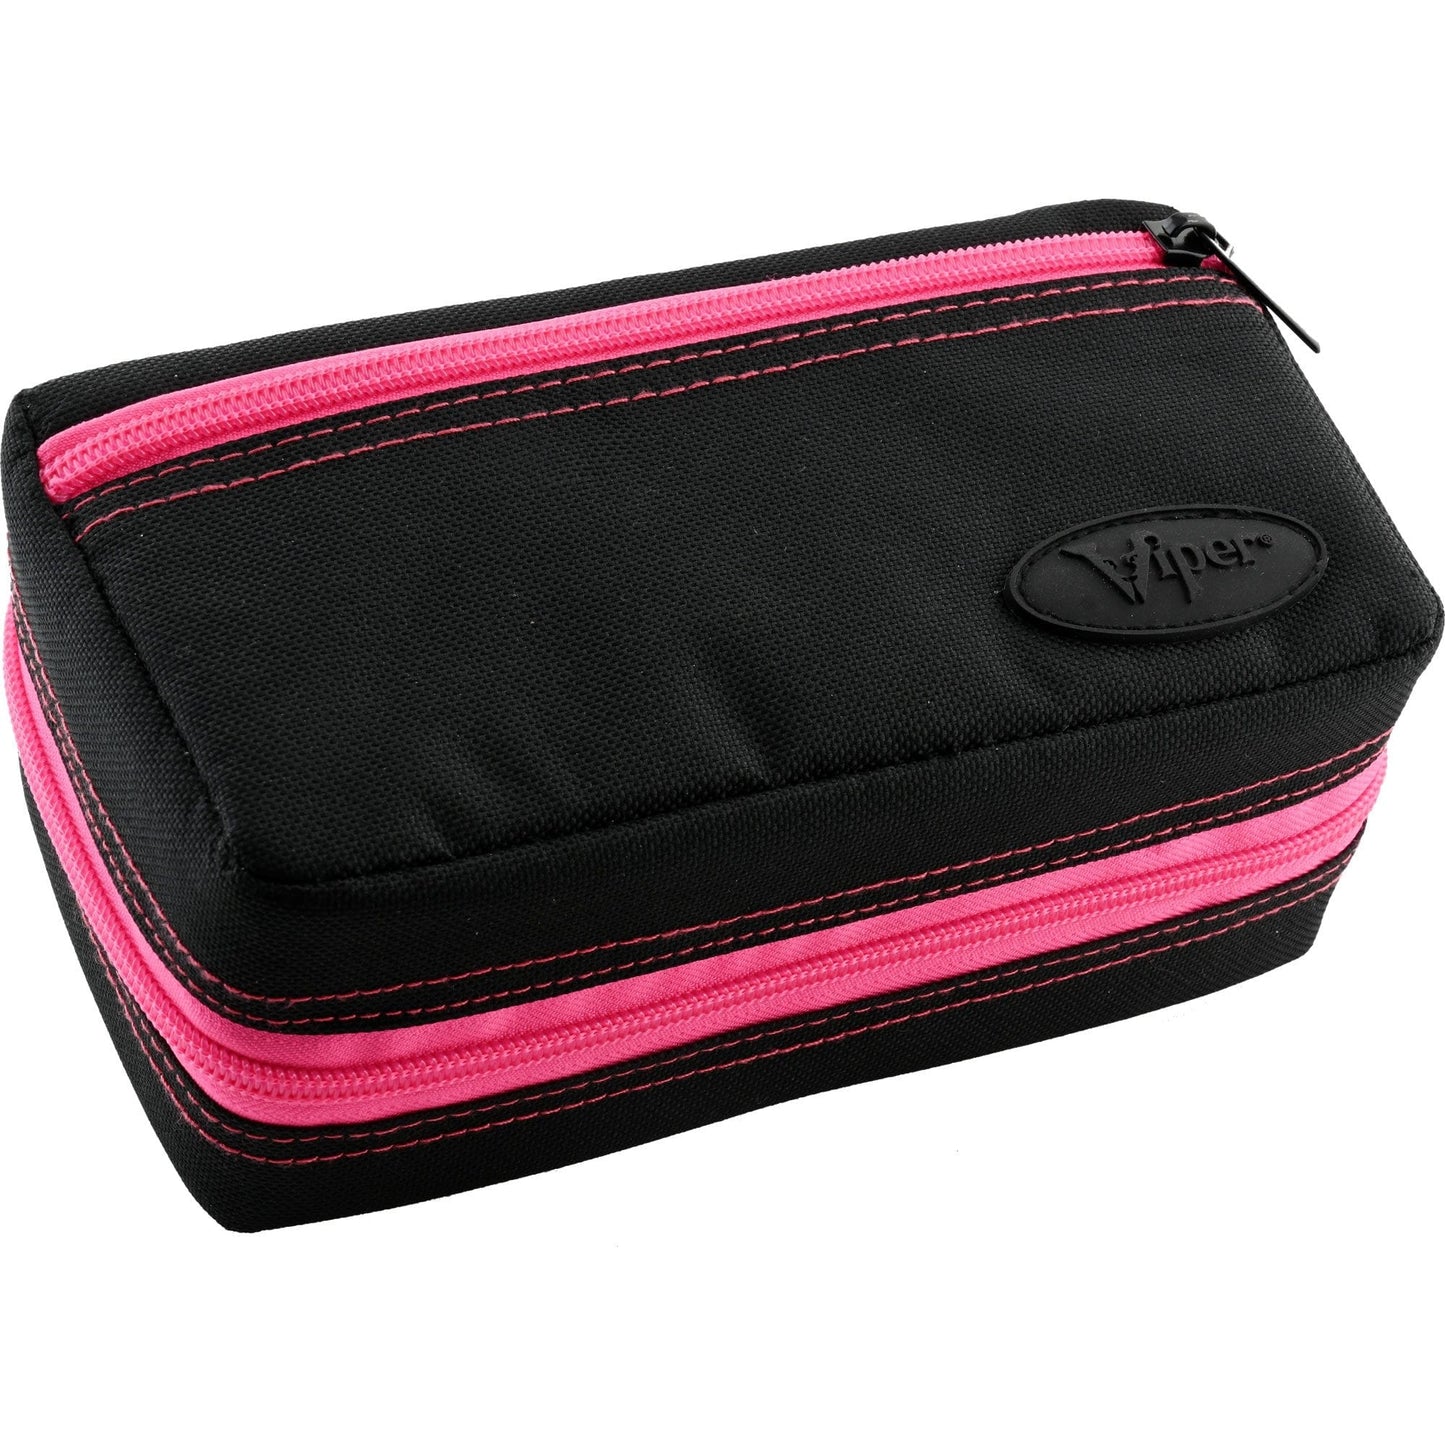 Viper Plazma Pro Dart Case - Extremely Tough & Durable Pink